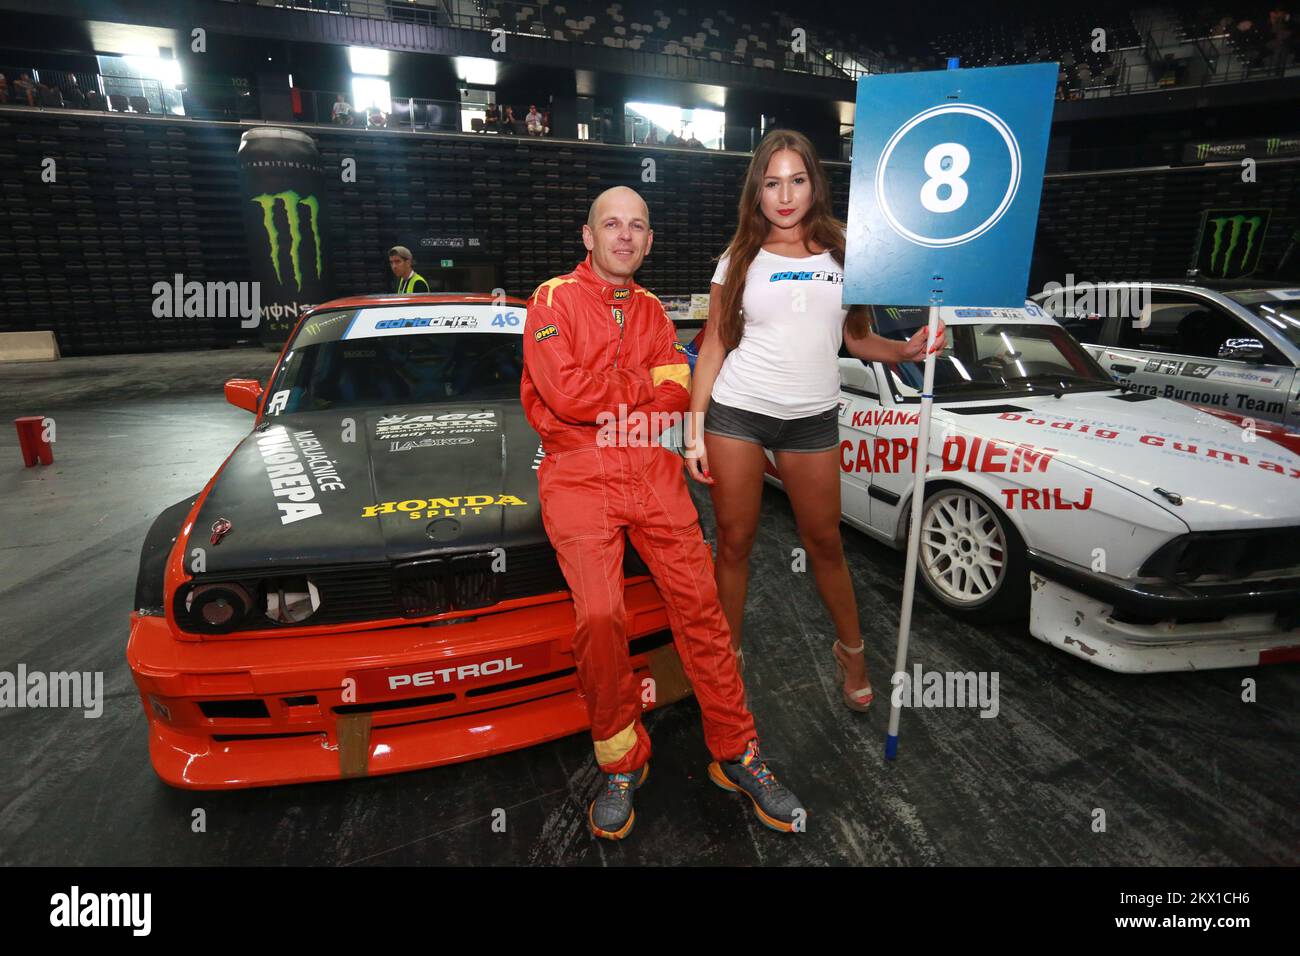 09.07.2017., Split, Croatia - The third race of the Adria Drift Series held in Spaladium Arena in Split that hosted 14 drivers from Austria, Croatia, Hungary, Italy, Serbia and Slovenia. Adria Drift Series RD3 The Arena is the only indoor race in Europe. Mile Vidakovic with his car E30. Photo: Miranda Cikotic/PIXSELL Stock Photo